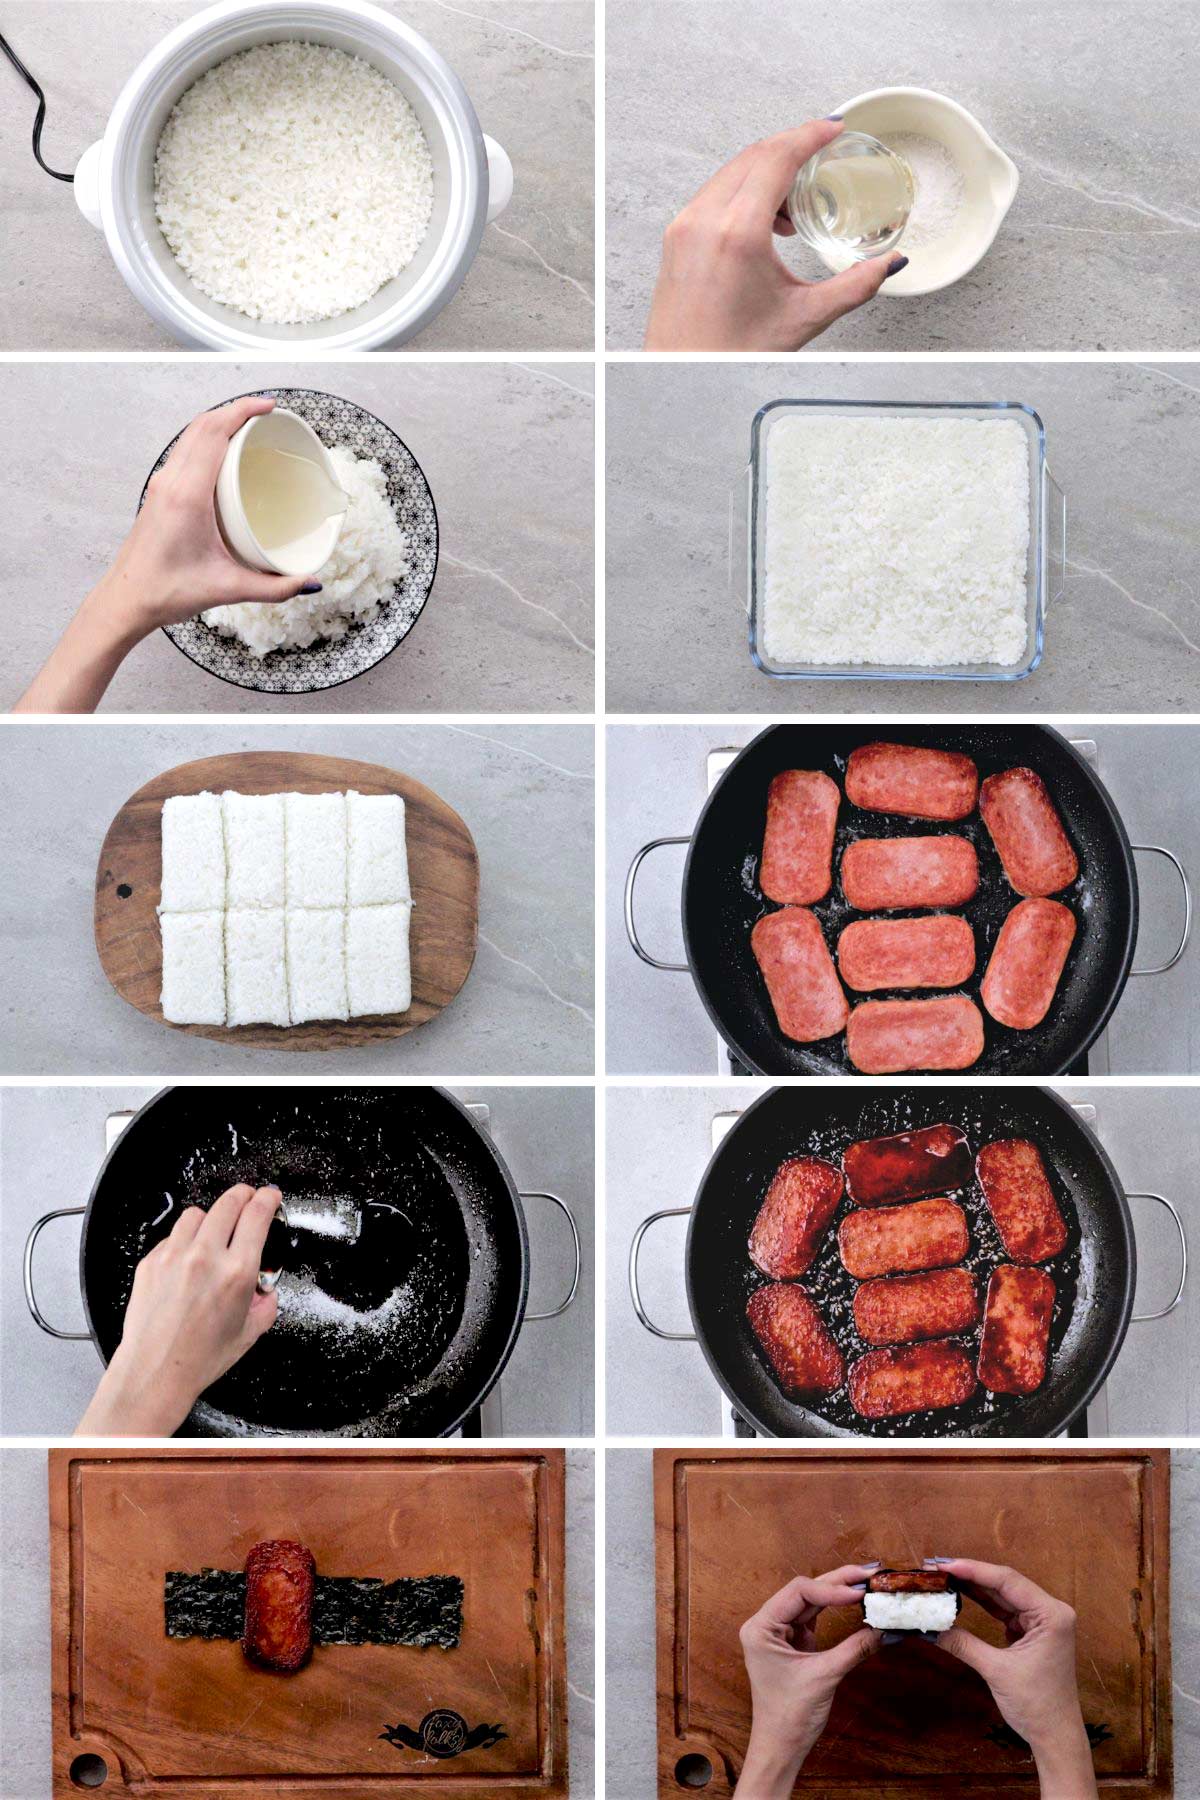 Steps on how to make Spam Musubi.